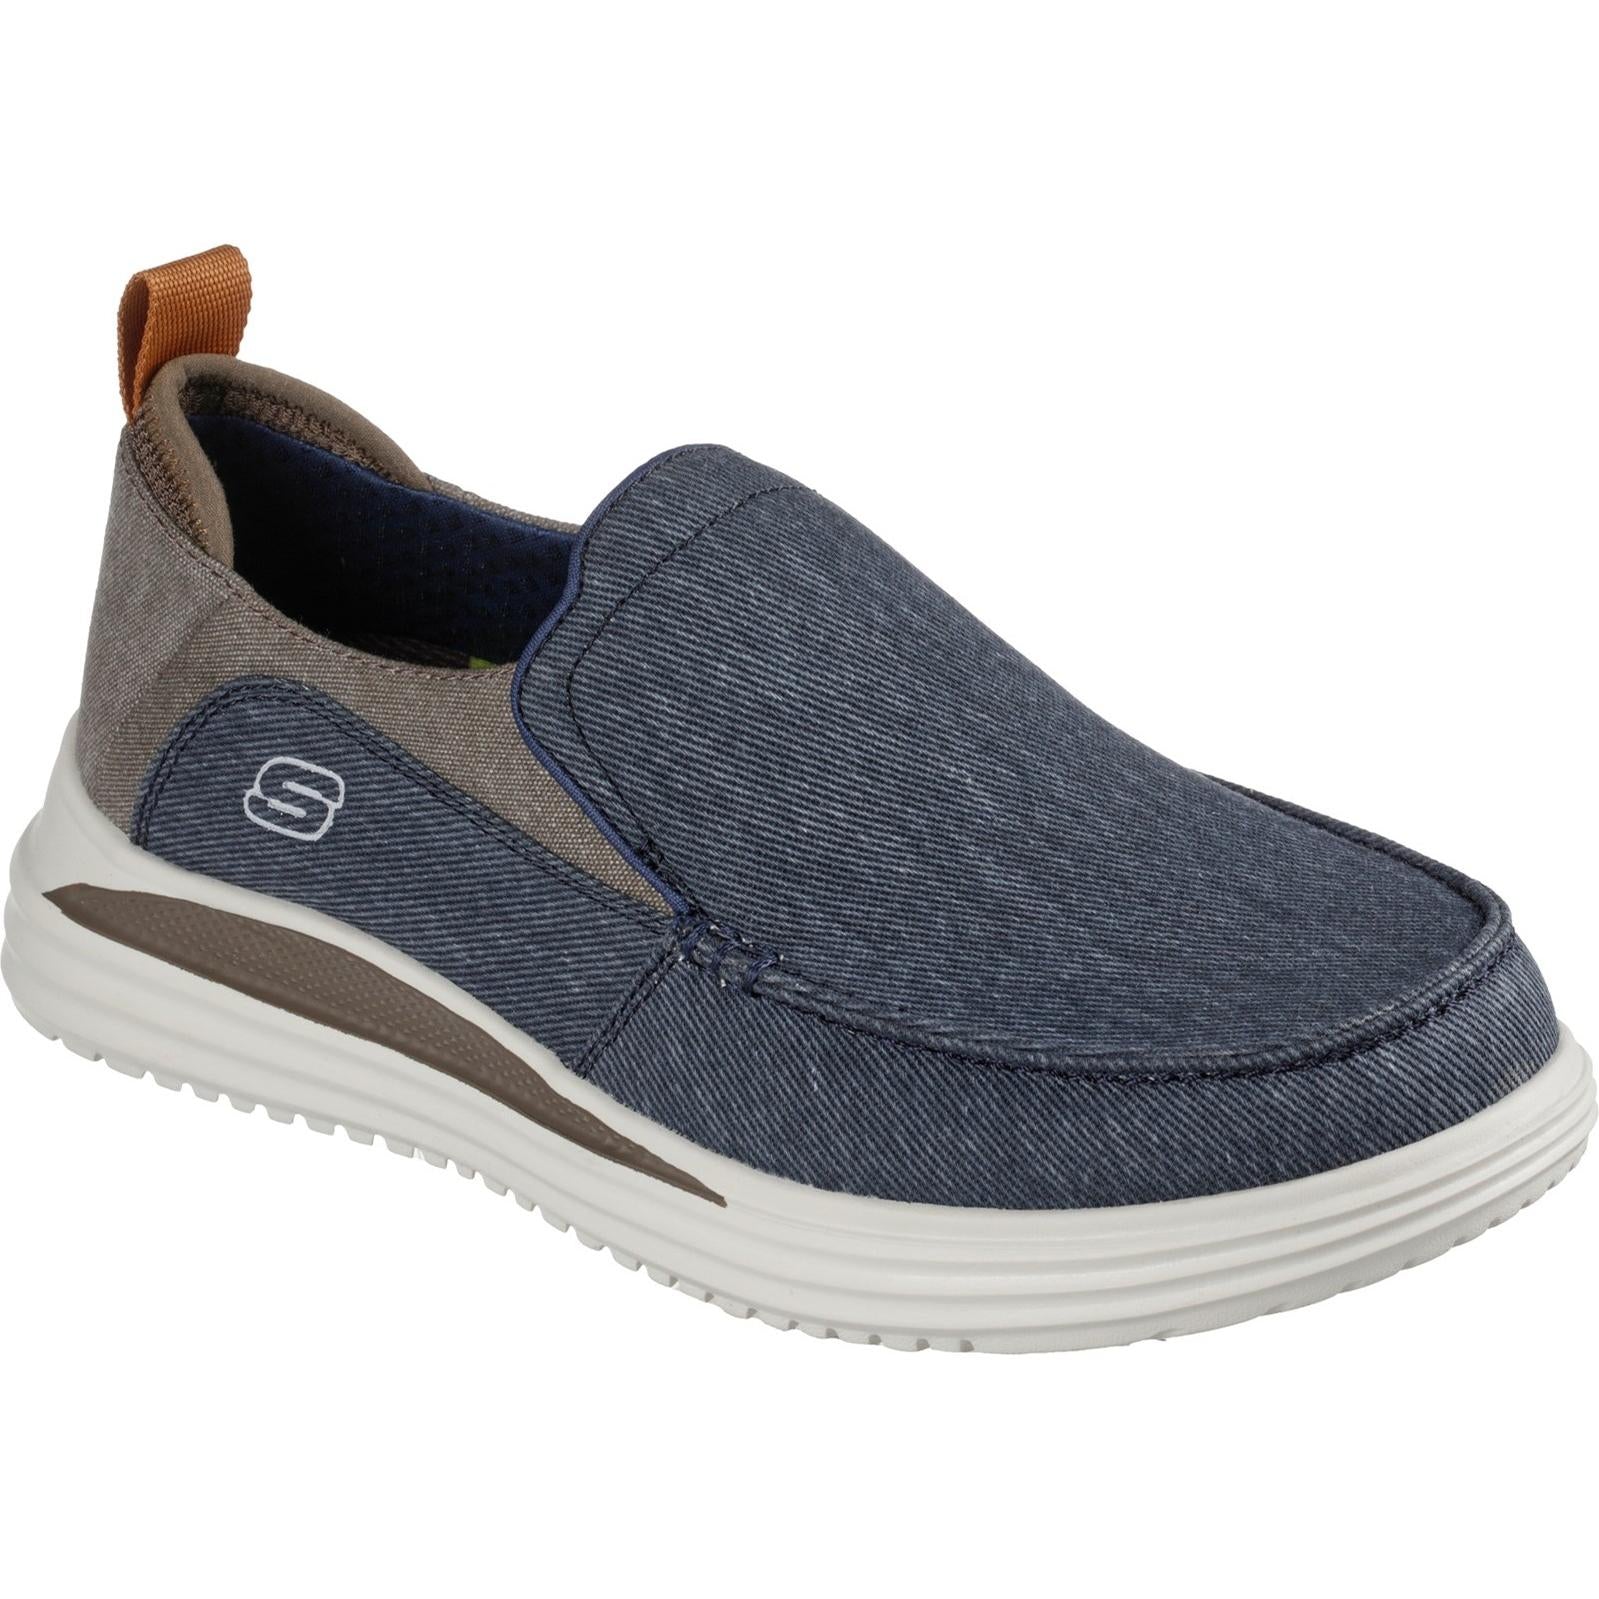 Skechers Proven Evers Shoes